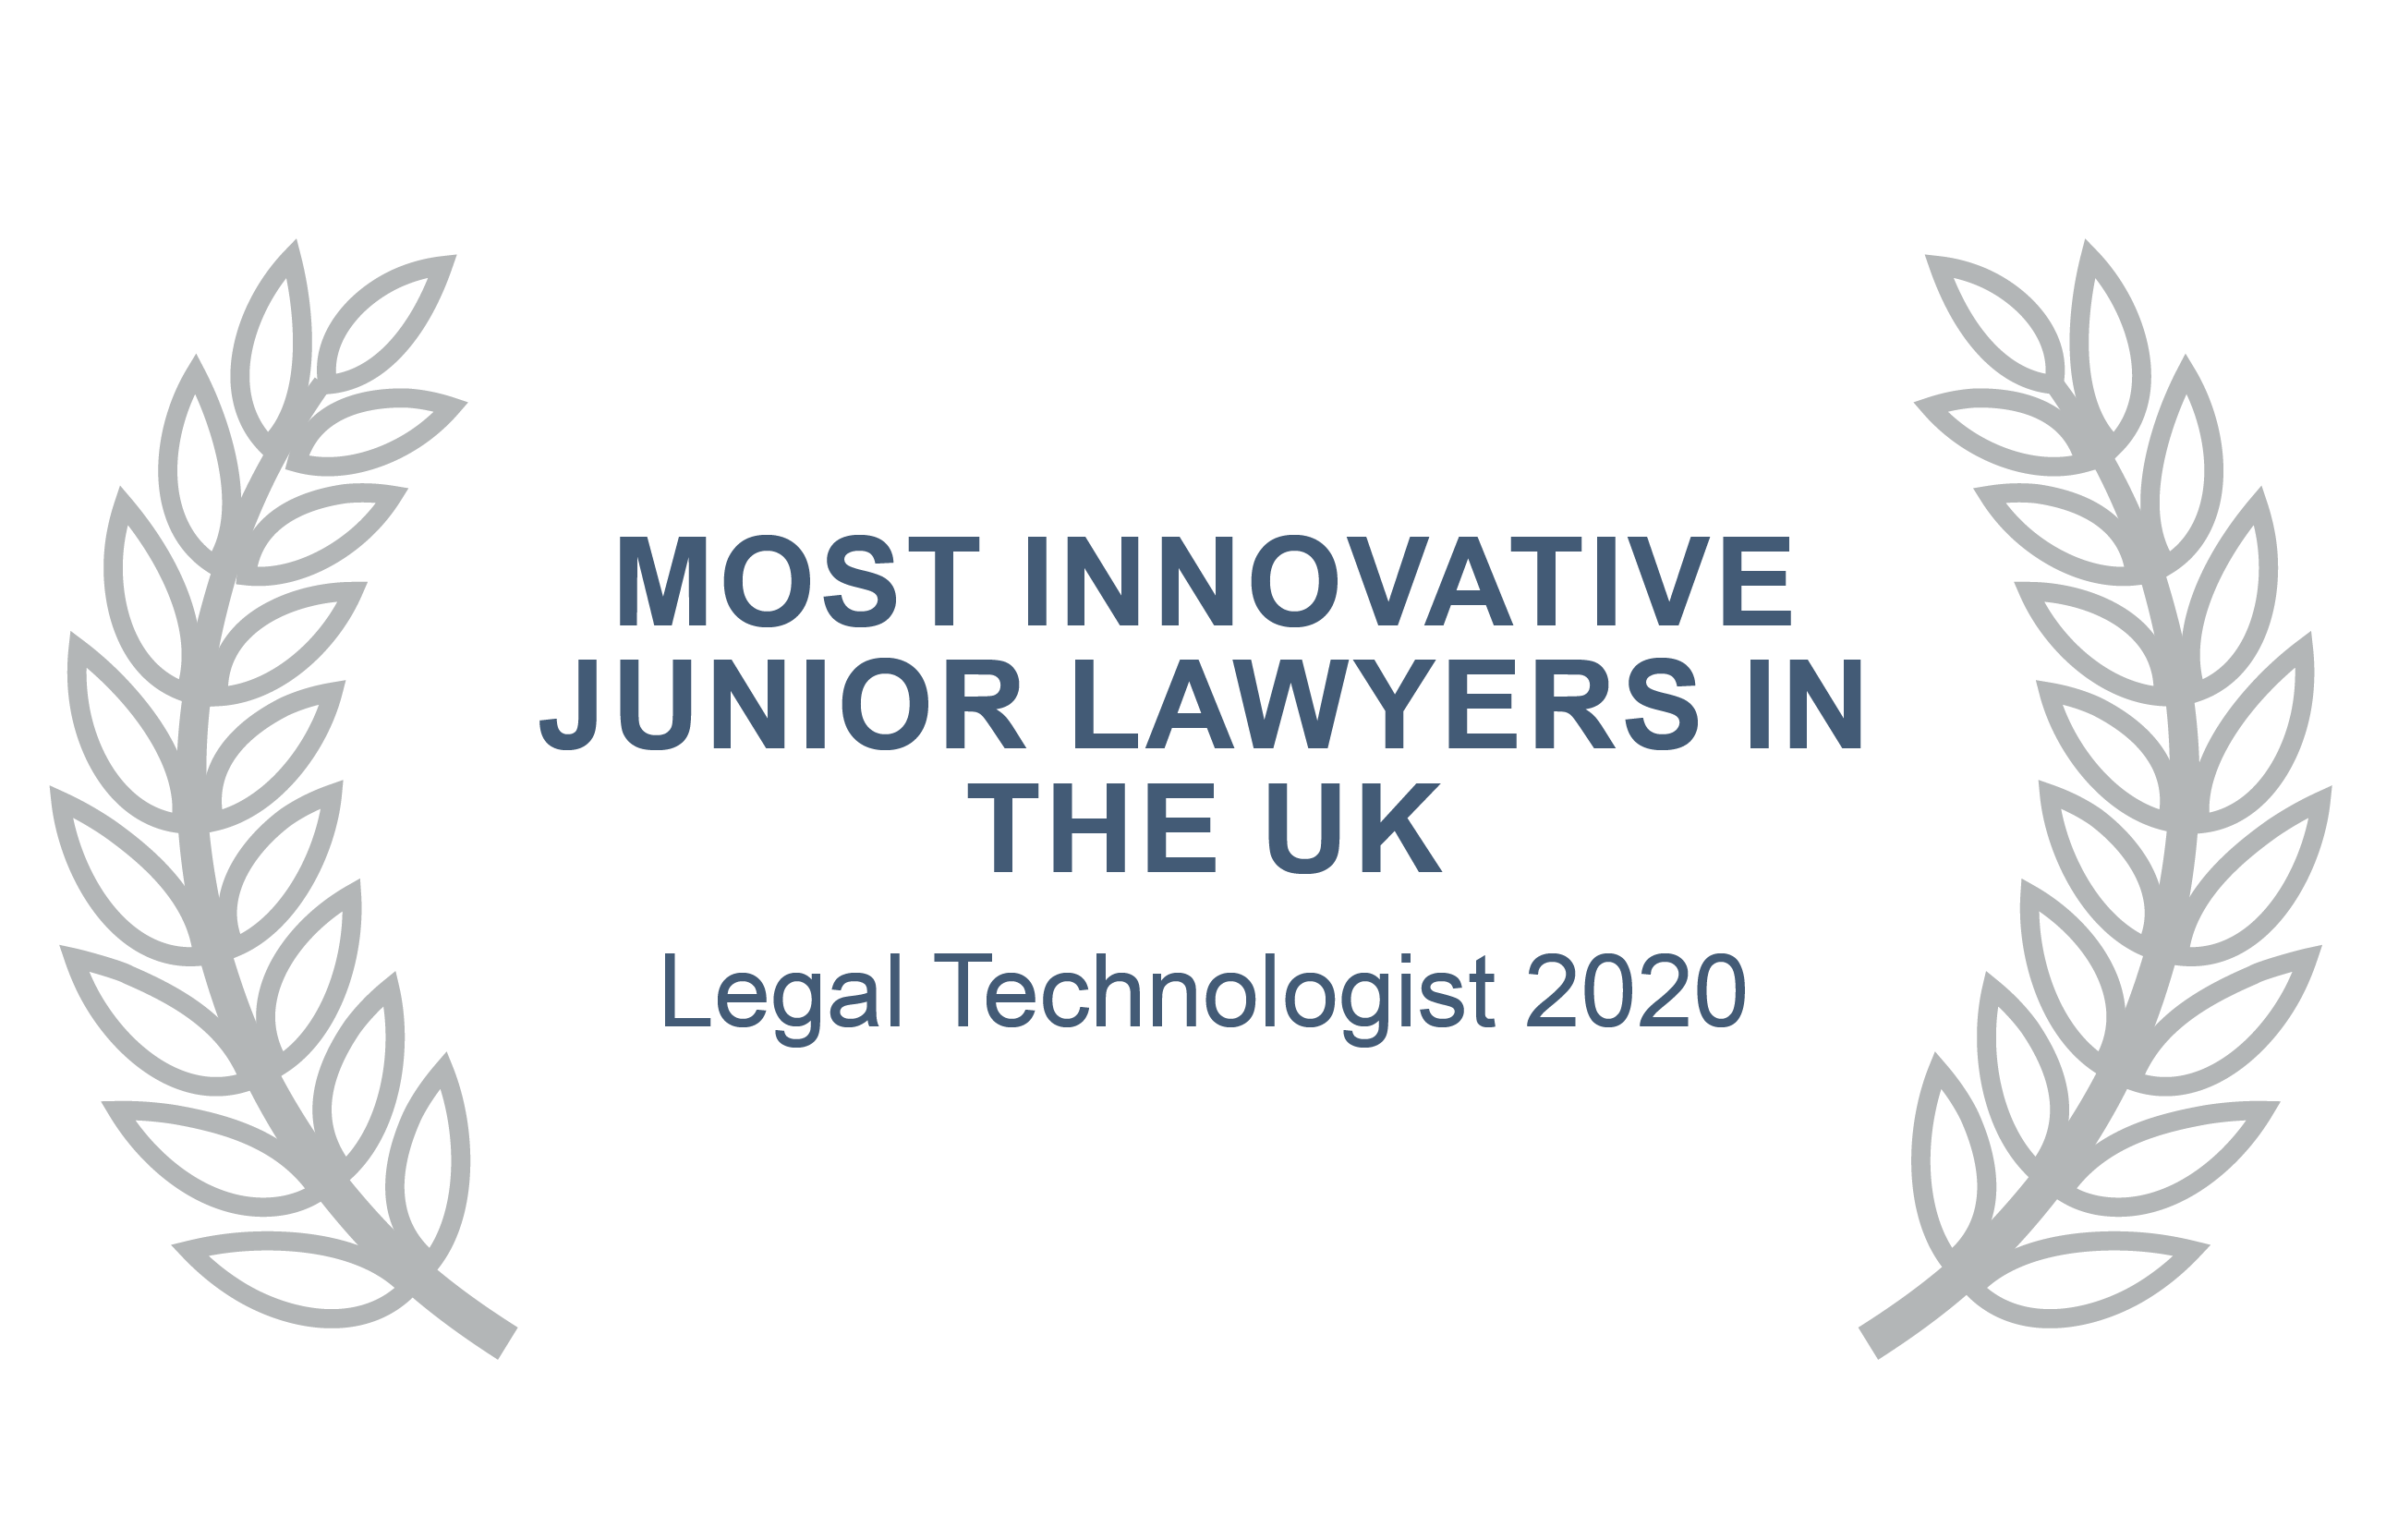 Most innovative junior lawyers in the UK